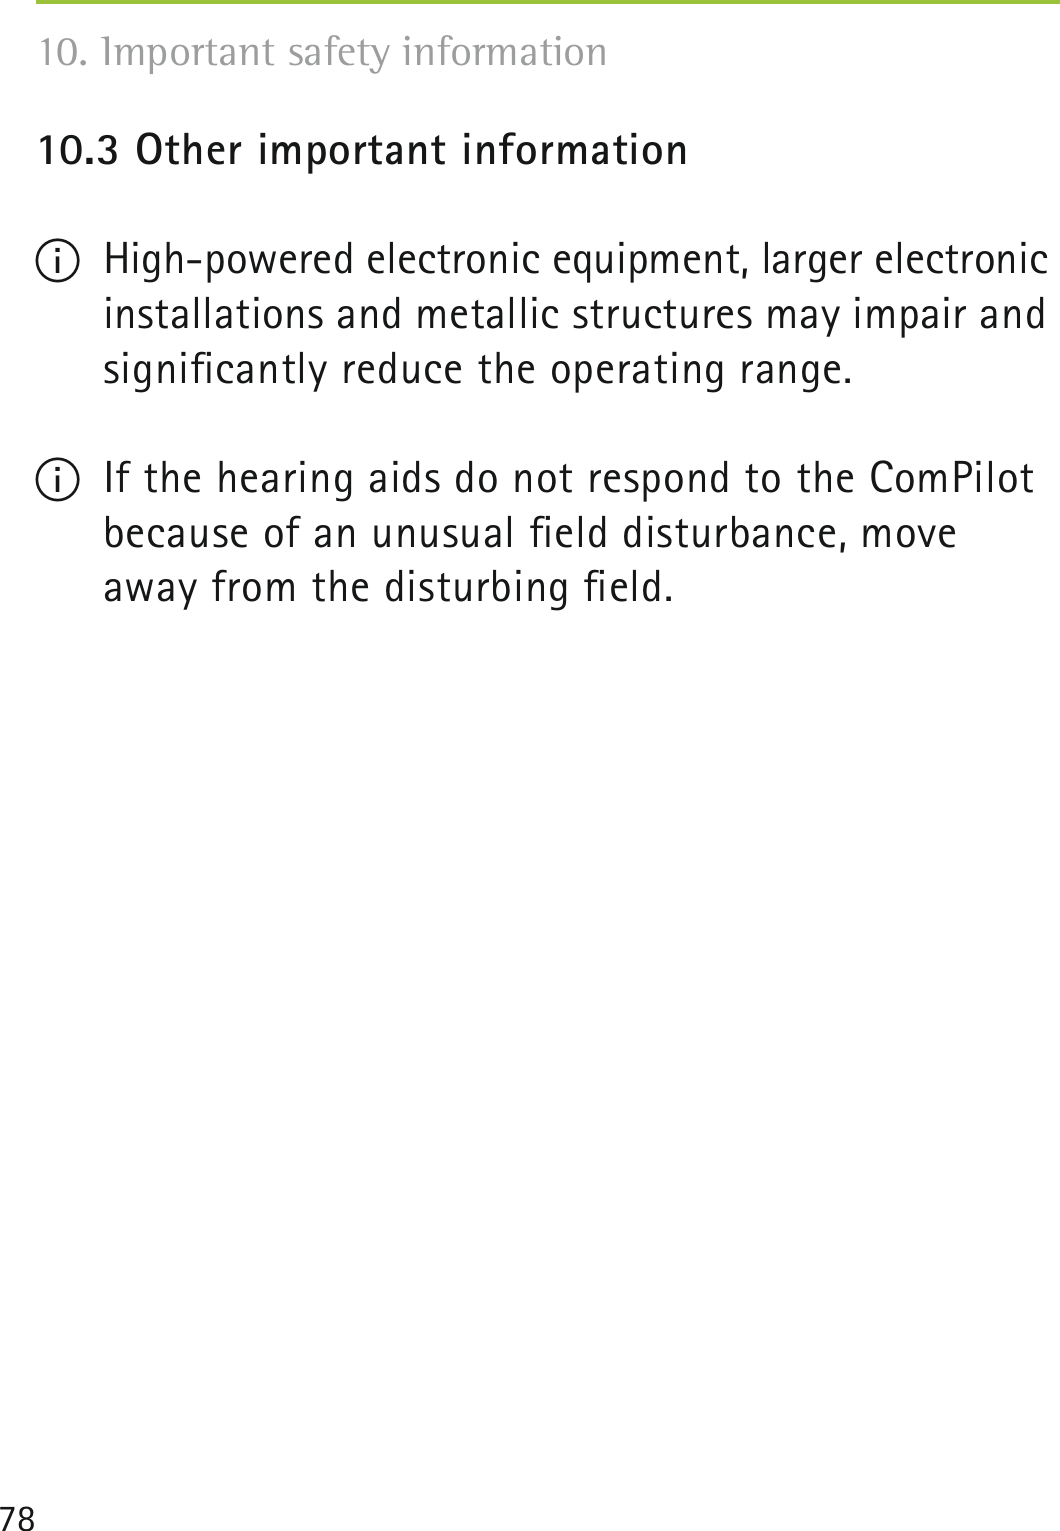 7810.3 Other important informationI  High-powered electronic equipment, larger electronic installations and metallic structures may impair and signiﬁcantly reduce the operating range.I  If the hearing aids do not respond to the ComPilot because of an unusual ﬁeld disturbance, move away from the disturbing ﬁeld.10. Important safety information 